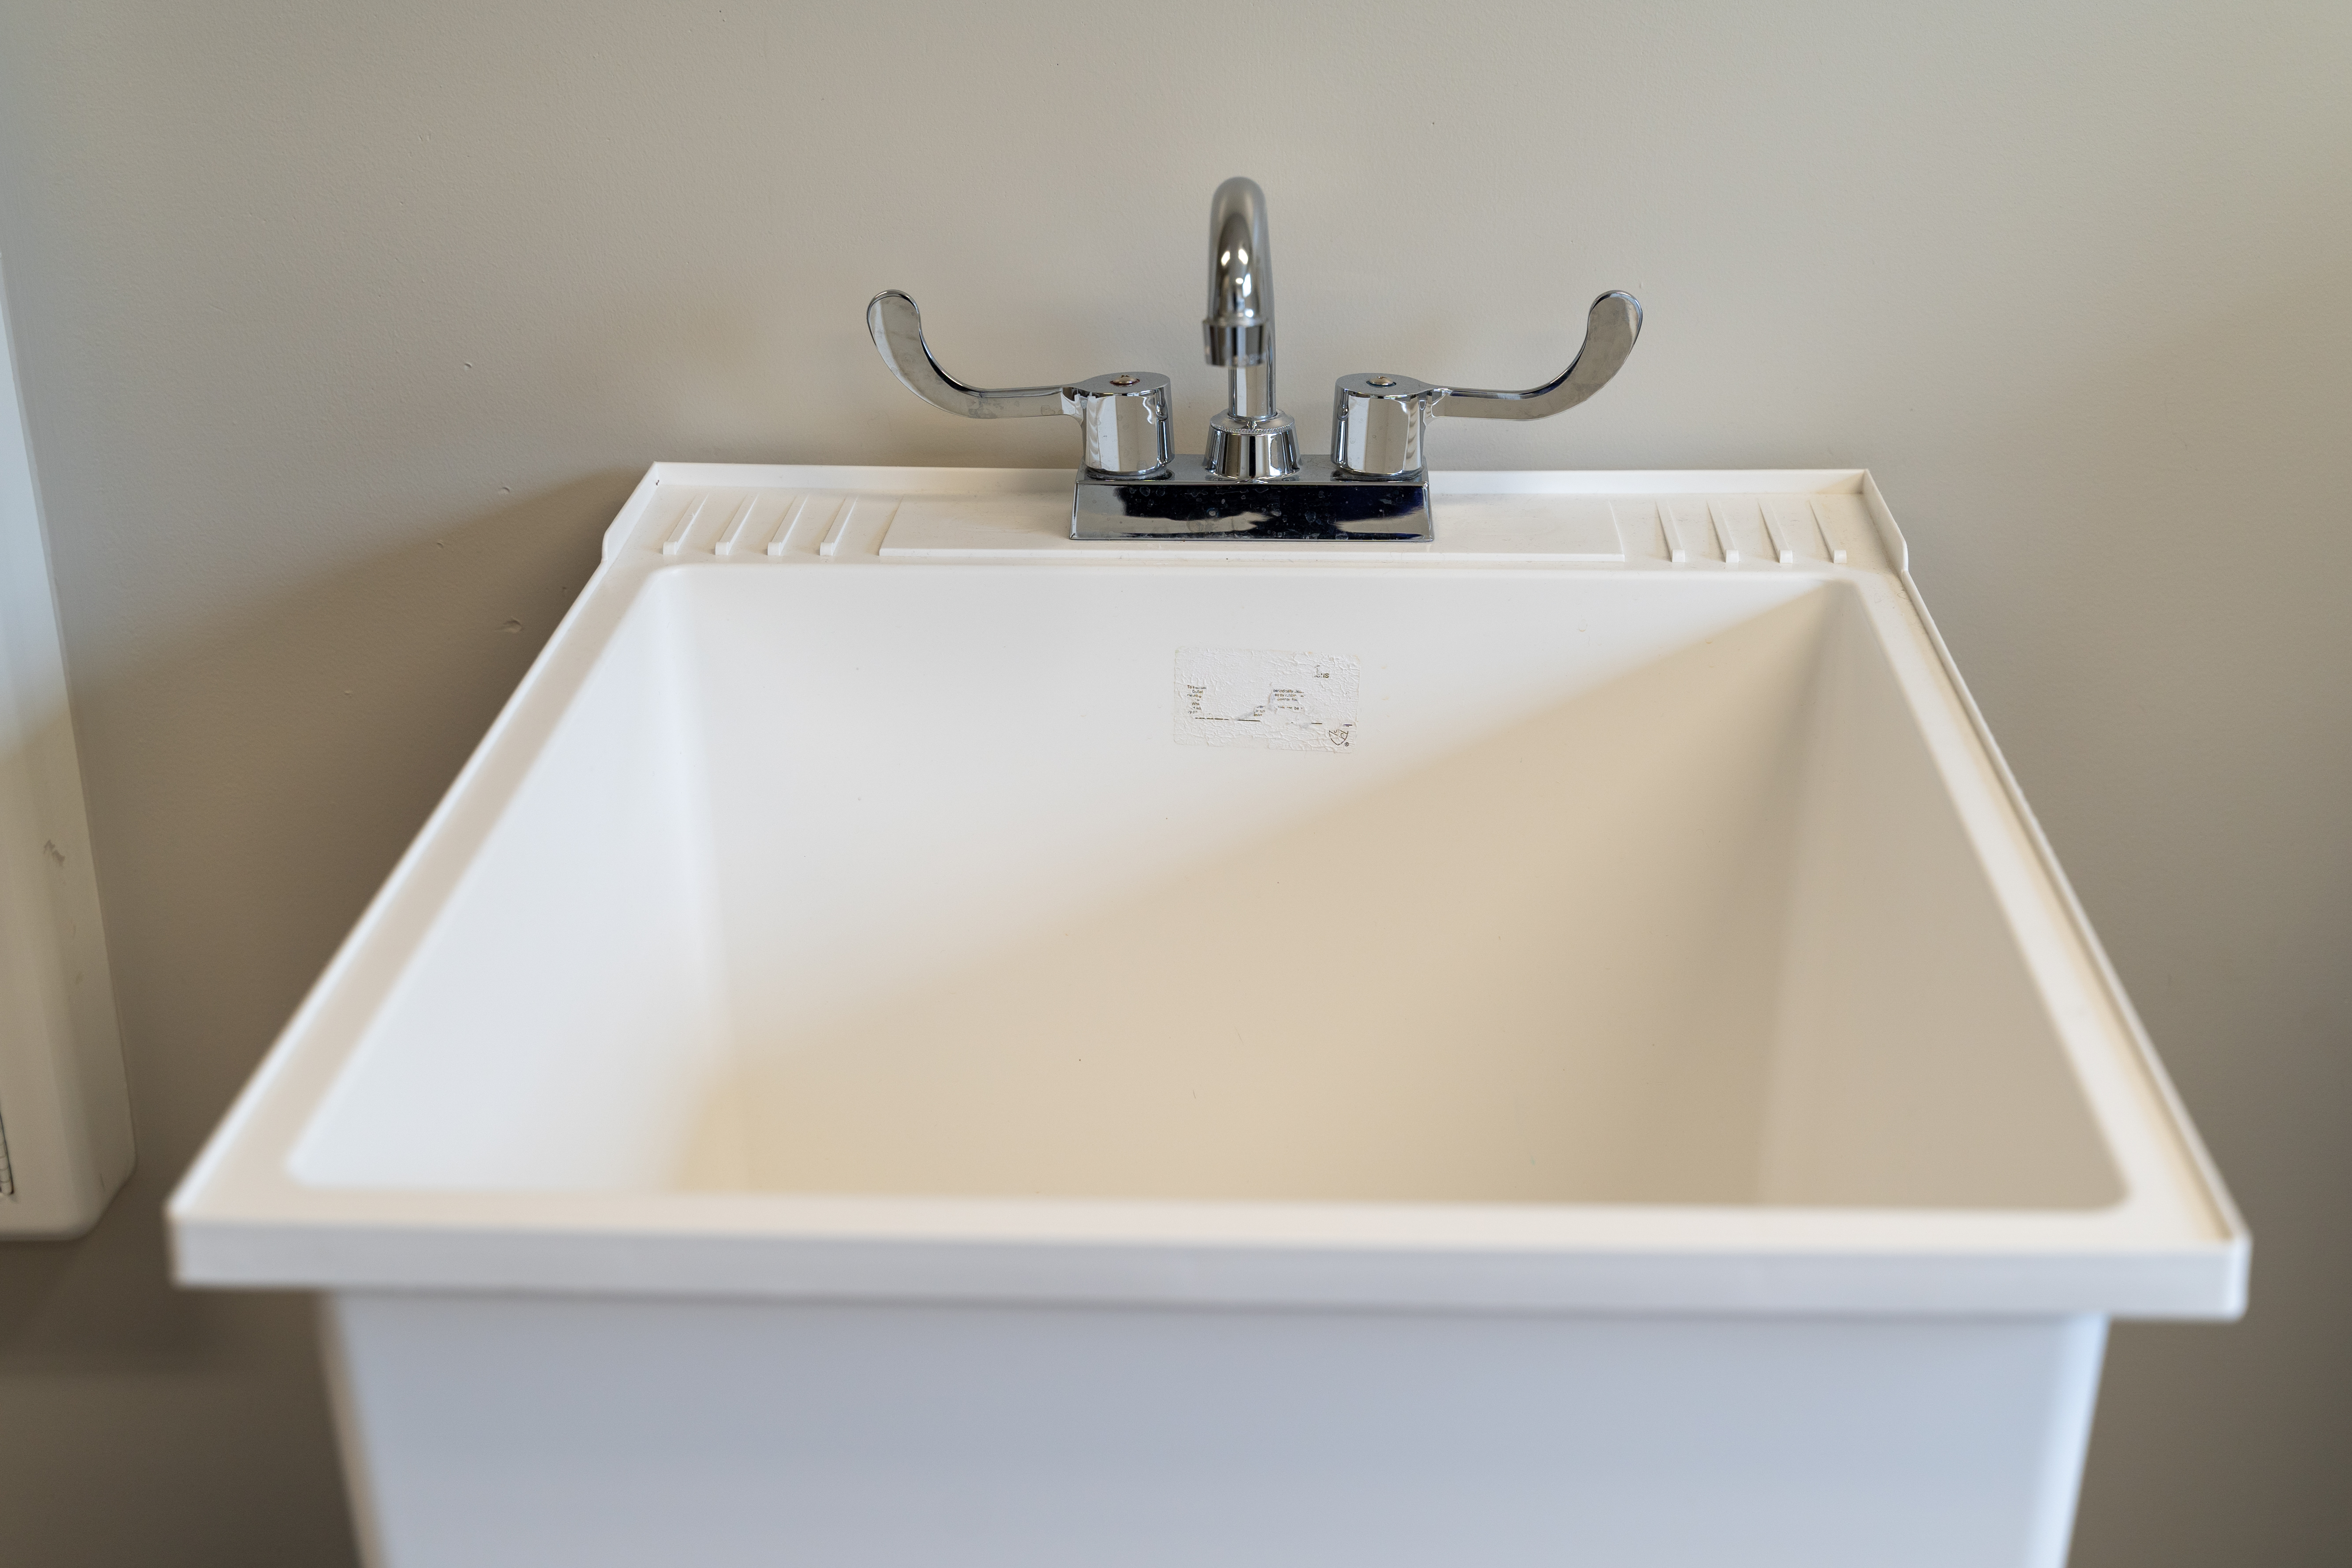 How to Get Rid of Stains in a Utility Sink